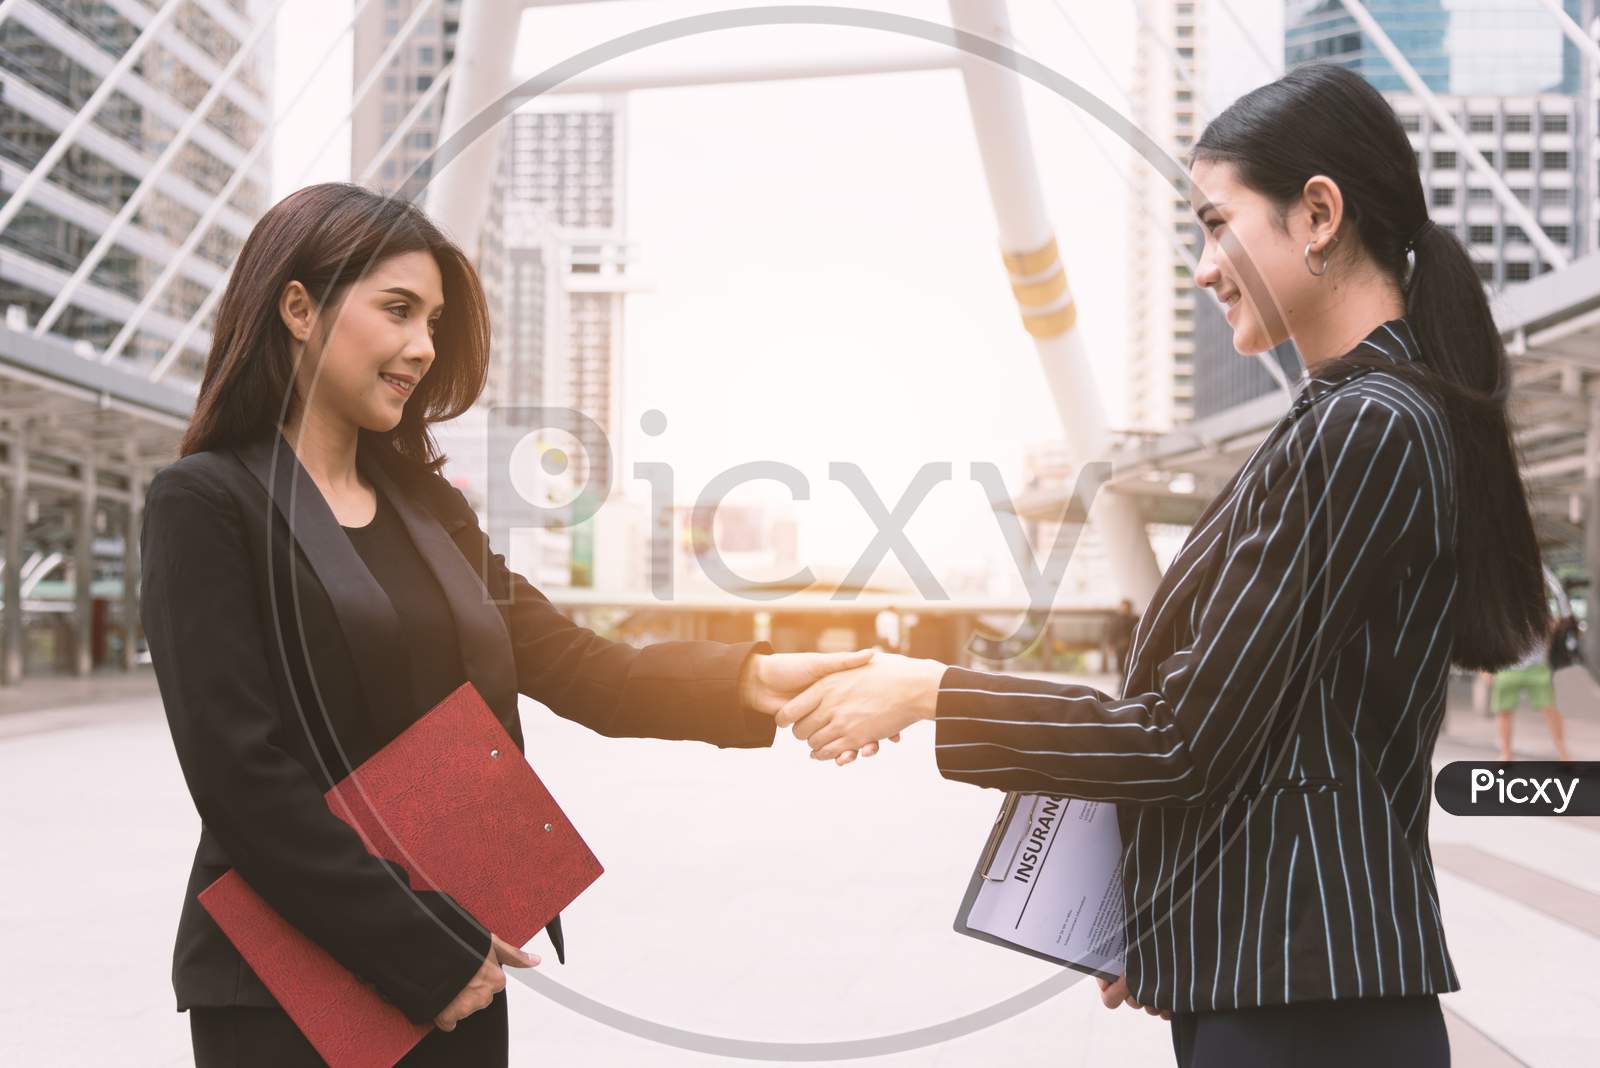 Two Women Making Handshake Greeting Each Other In Group Meeting At Outdoors. Business People And Deal Contract. Friendship And Leadership Concept.